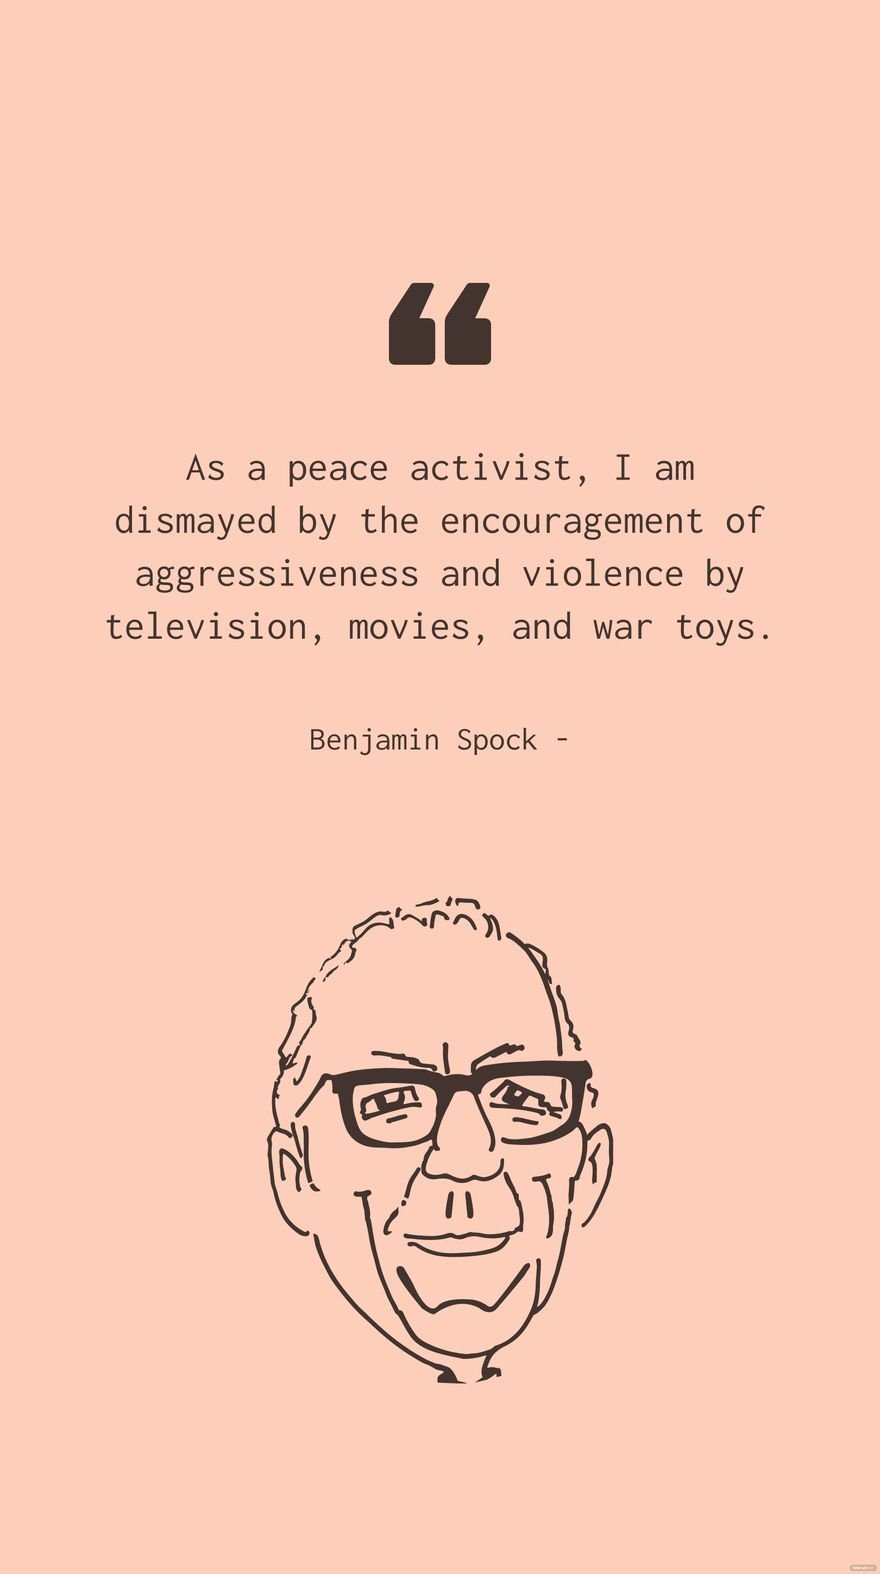 Benjamin Spock - As a peace activist, I am dismayed by the encouragement of aggressiveness and violence by television, movies, and war toys. Template